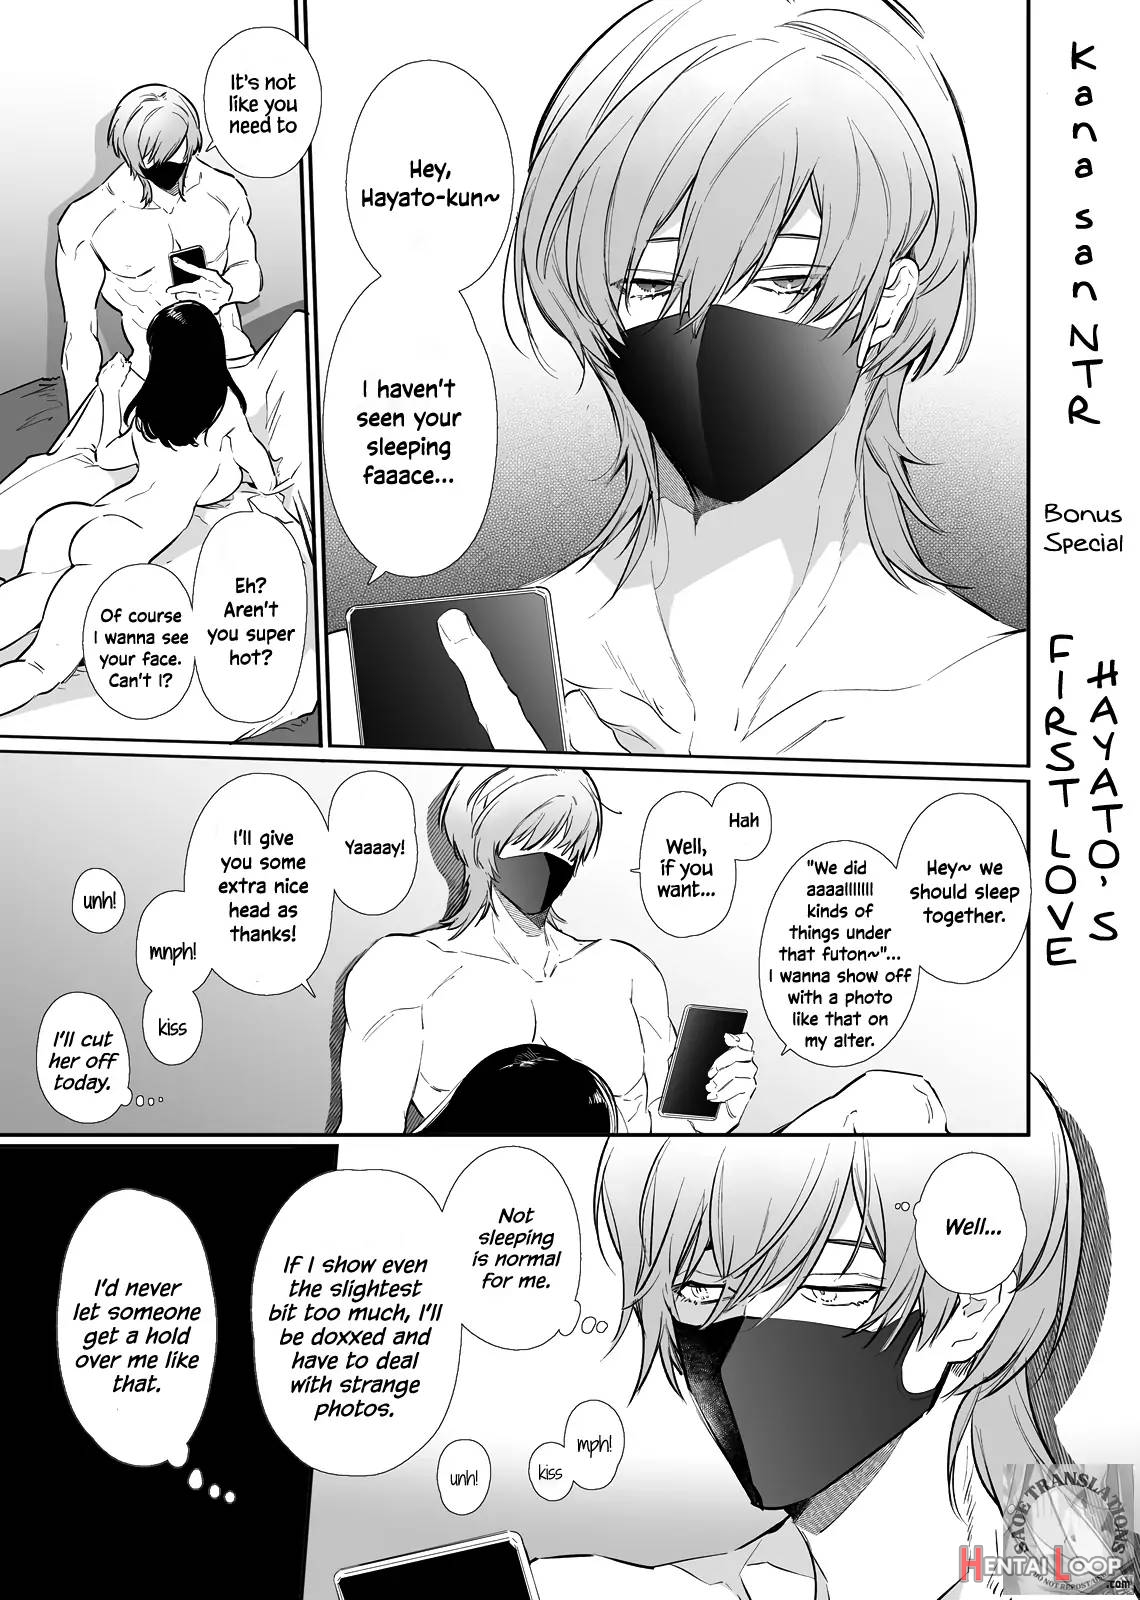 Kana-san Ntr ~ Degradation Of A Housewife By A Guy In An Alter Account ~ page 70